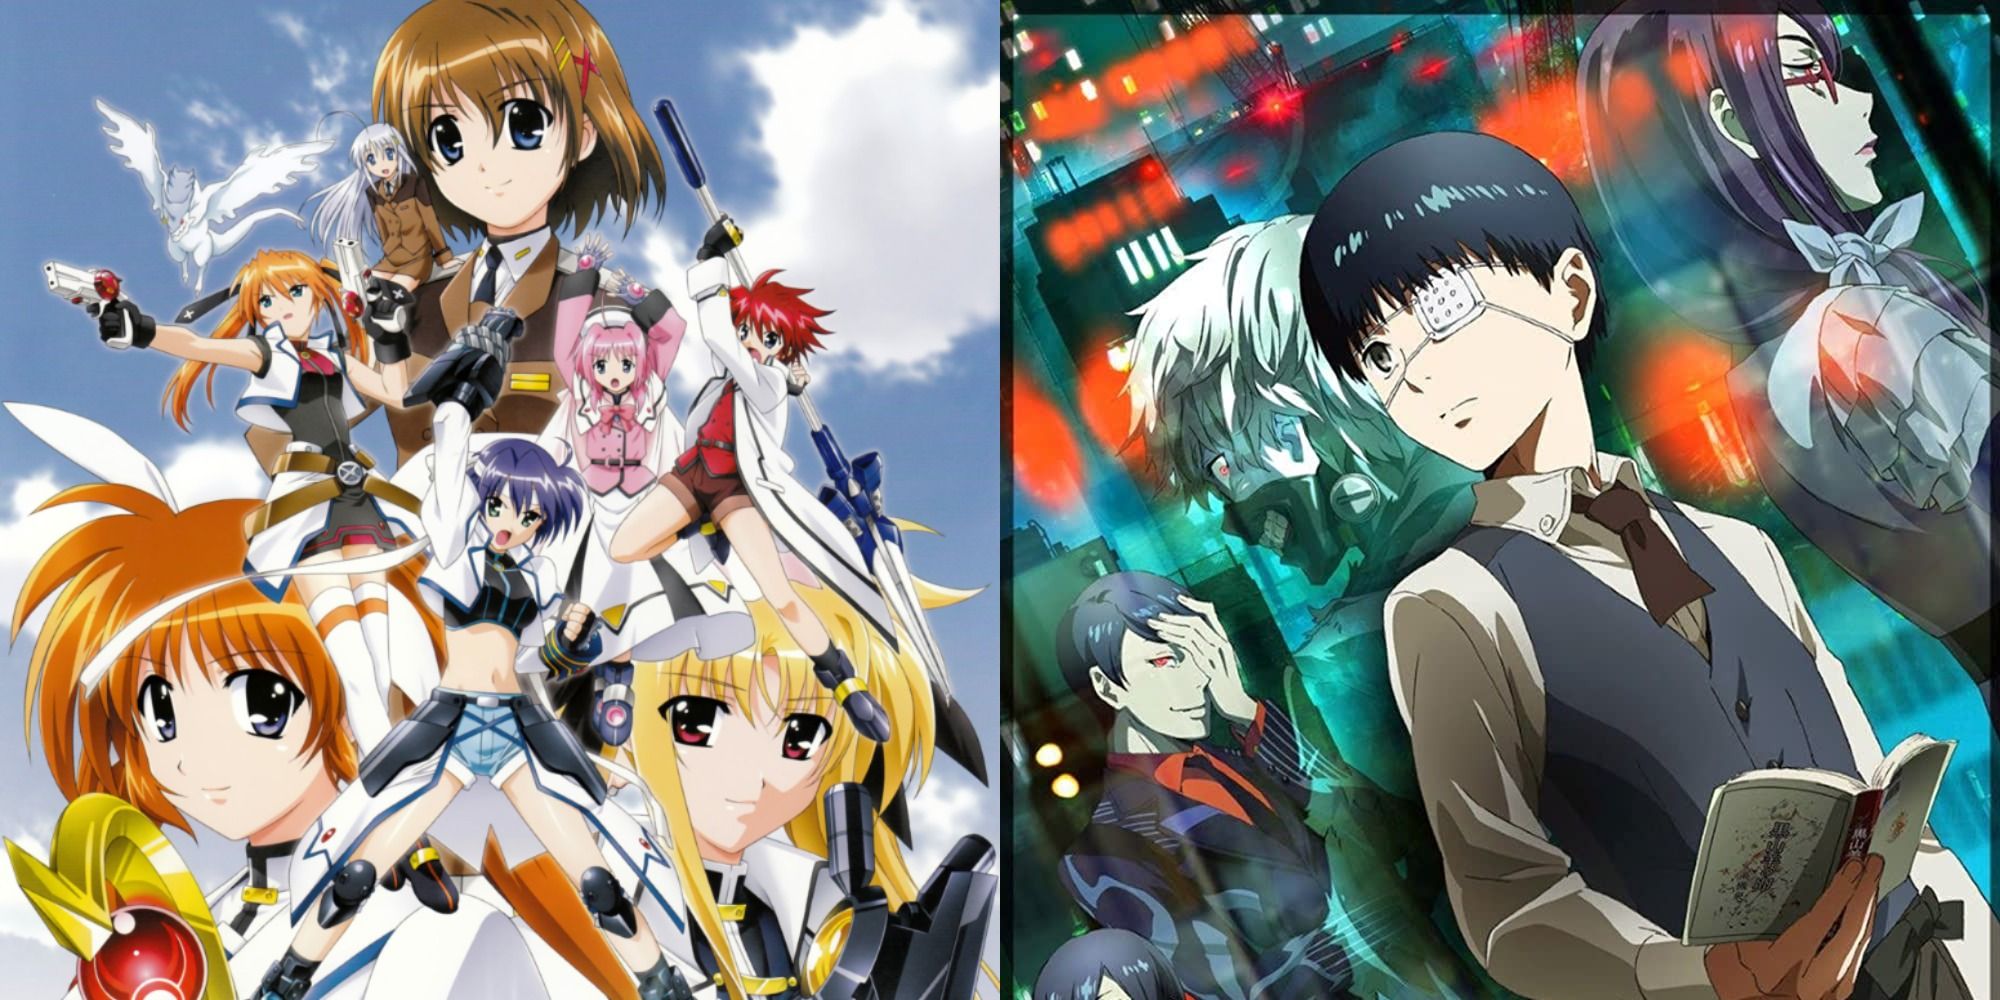 Split image showing characters from the Nanoha Strikers and Tokyo Ghoul animes